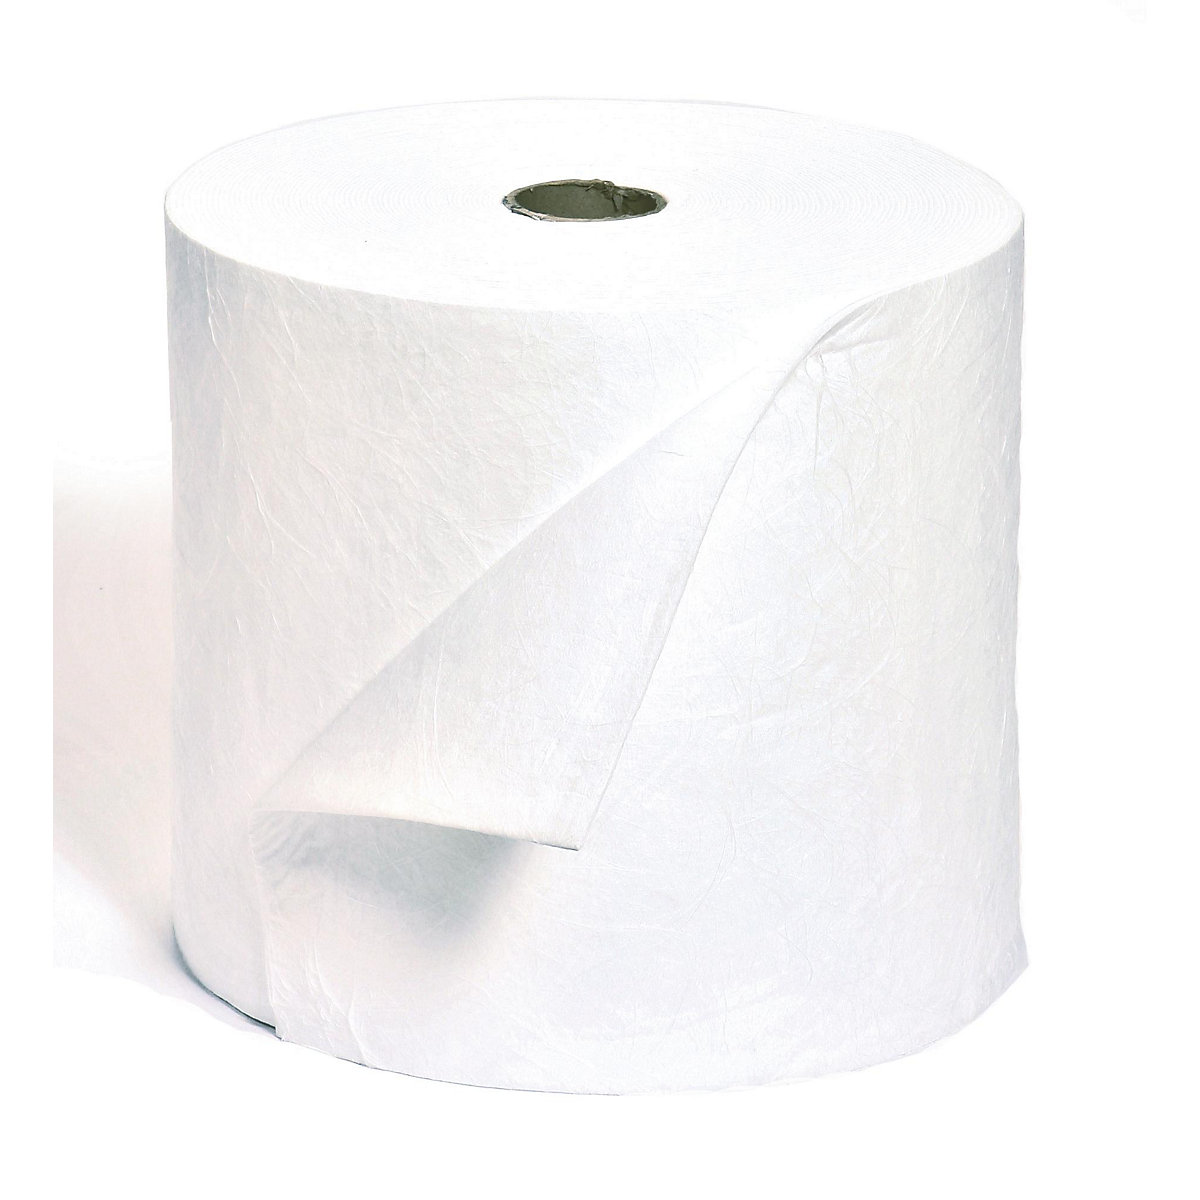 FIRST absorbent sheeting, sheeting roll, no perforations, medium, for oil, 400 mm x 60 m, pack of 2 rolls-9